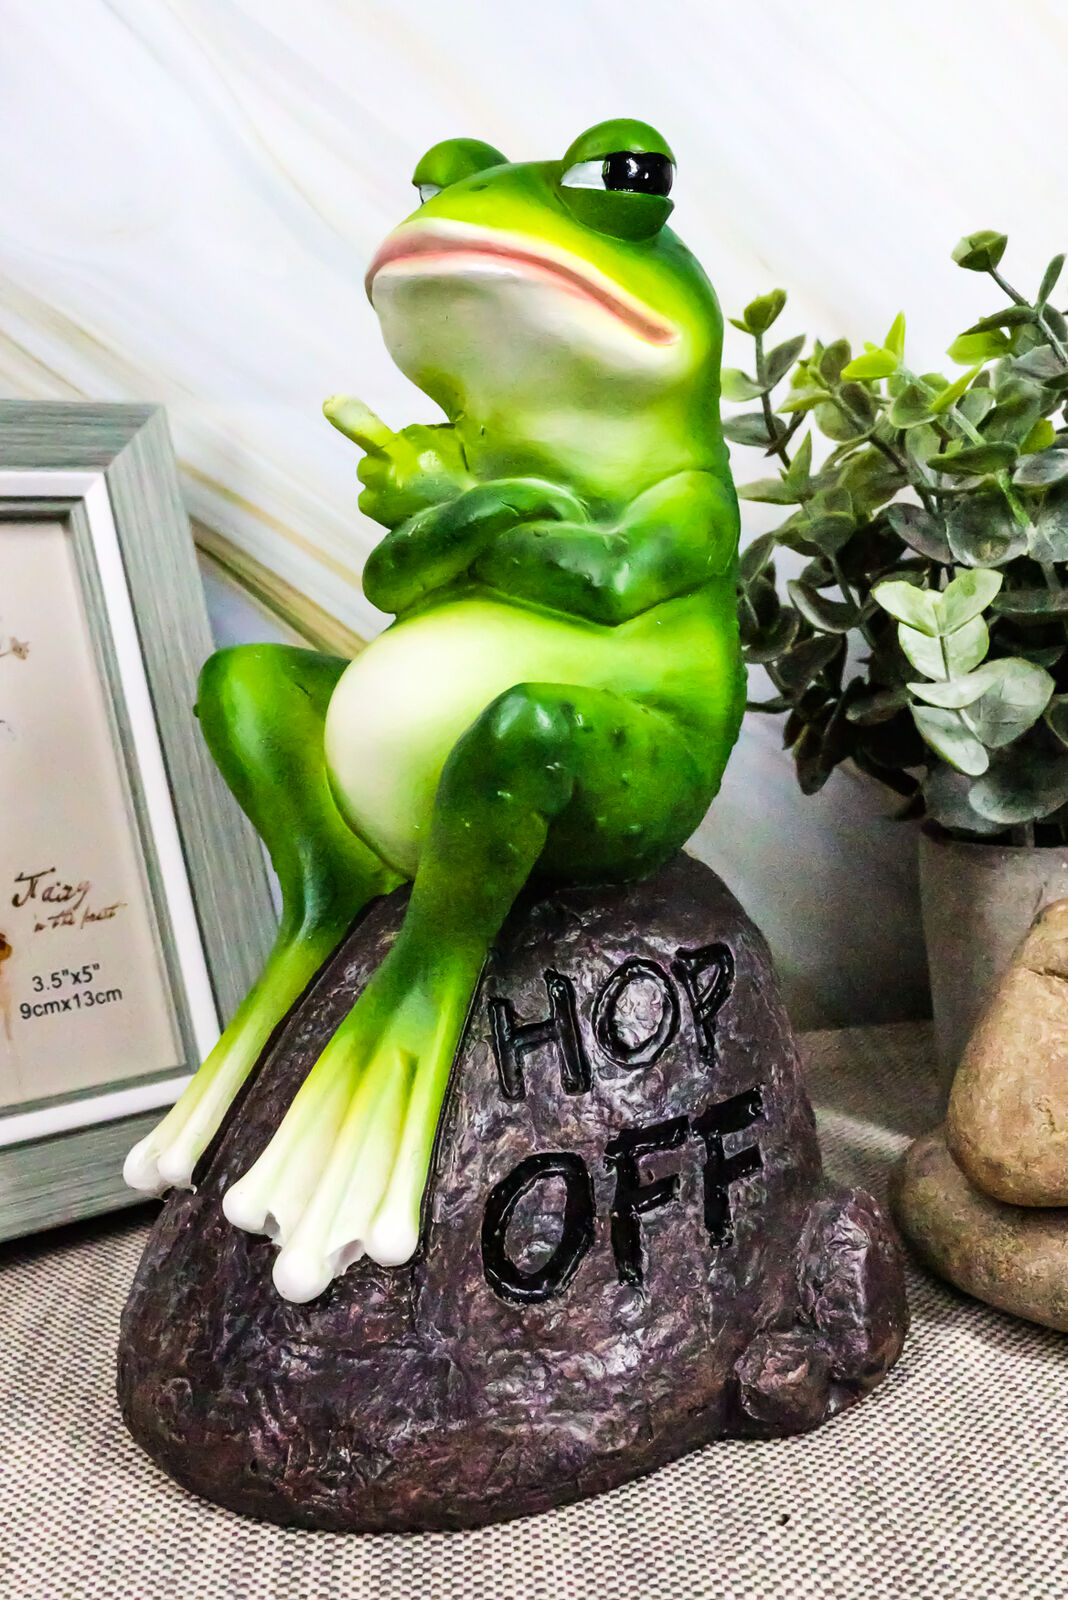 Hop Off Rude Feisty Toad Frog Flipping The Bird Finger On Landscape Rock Statue